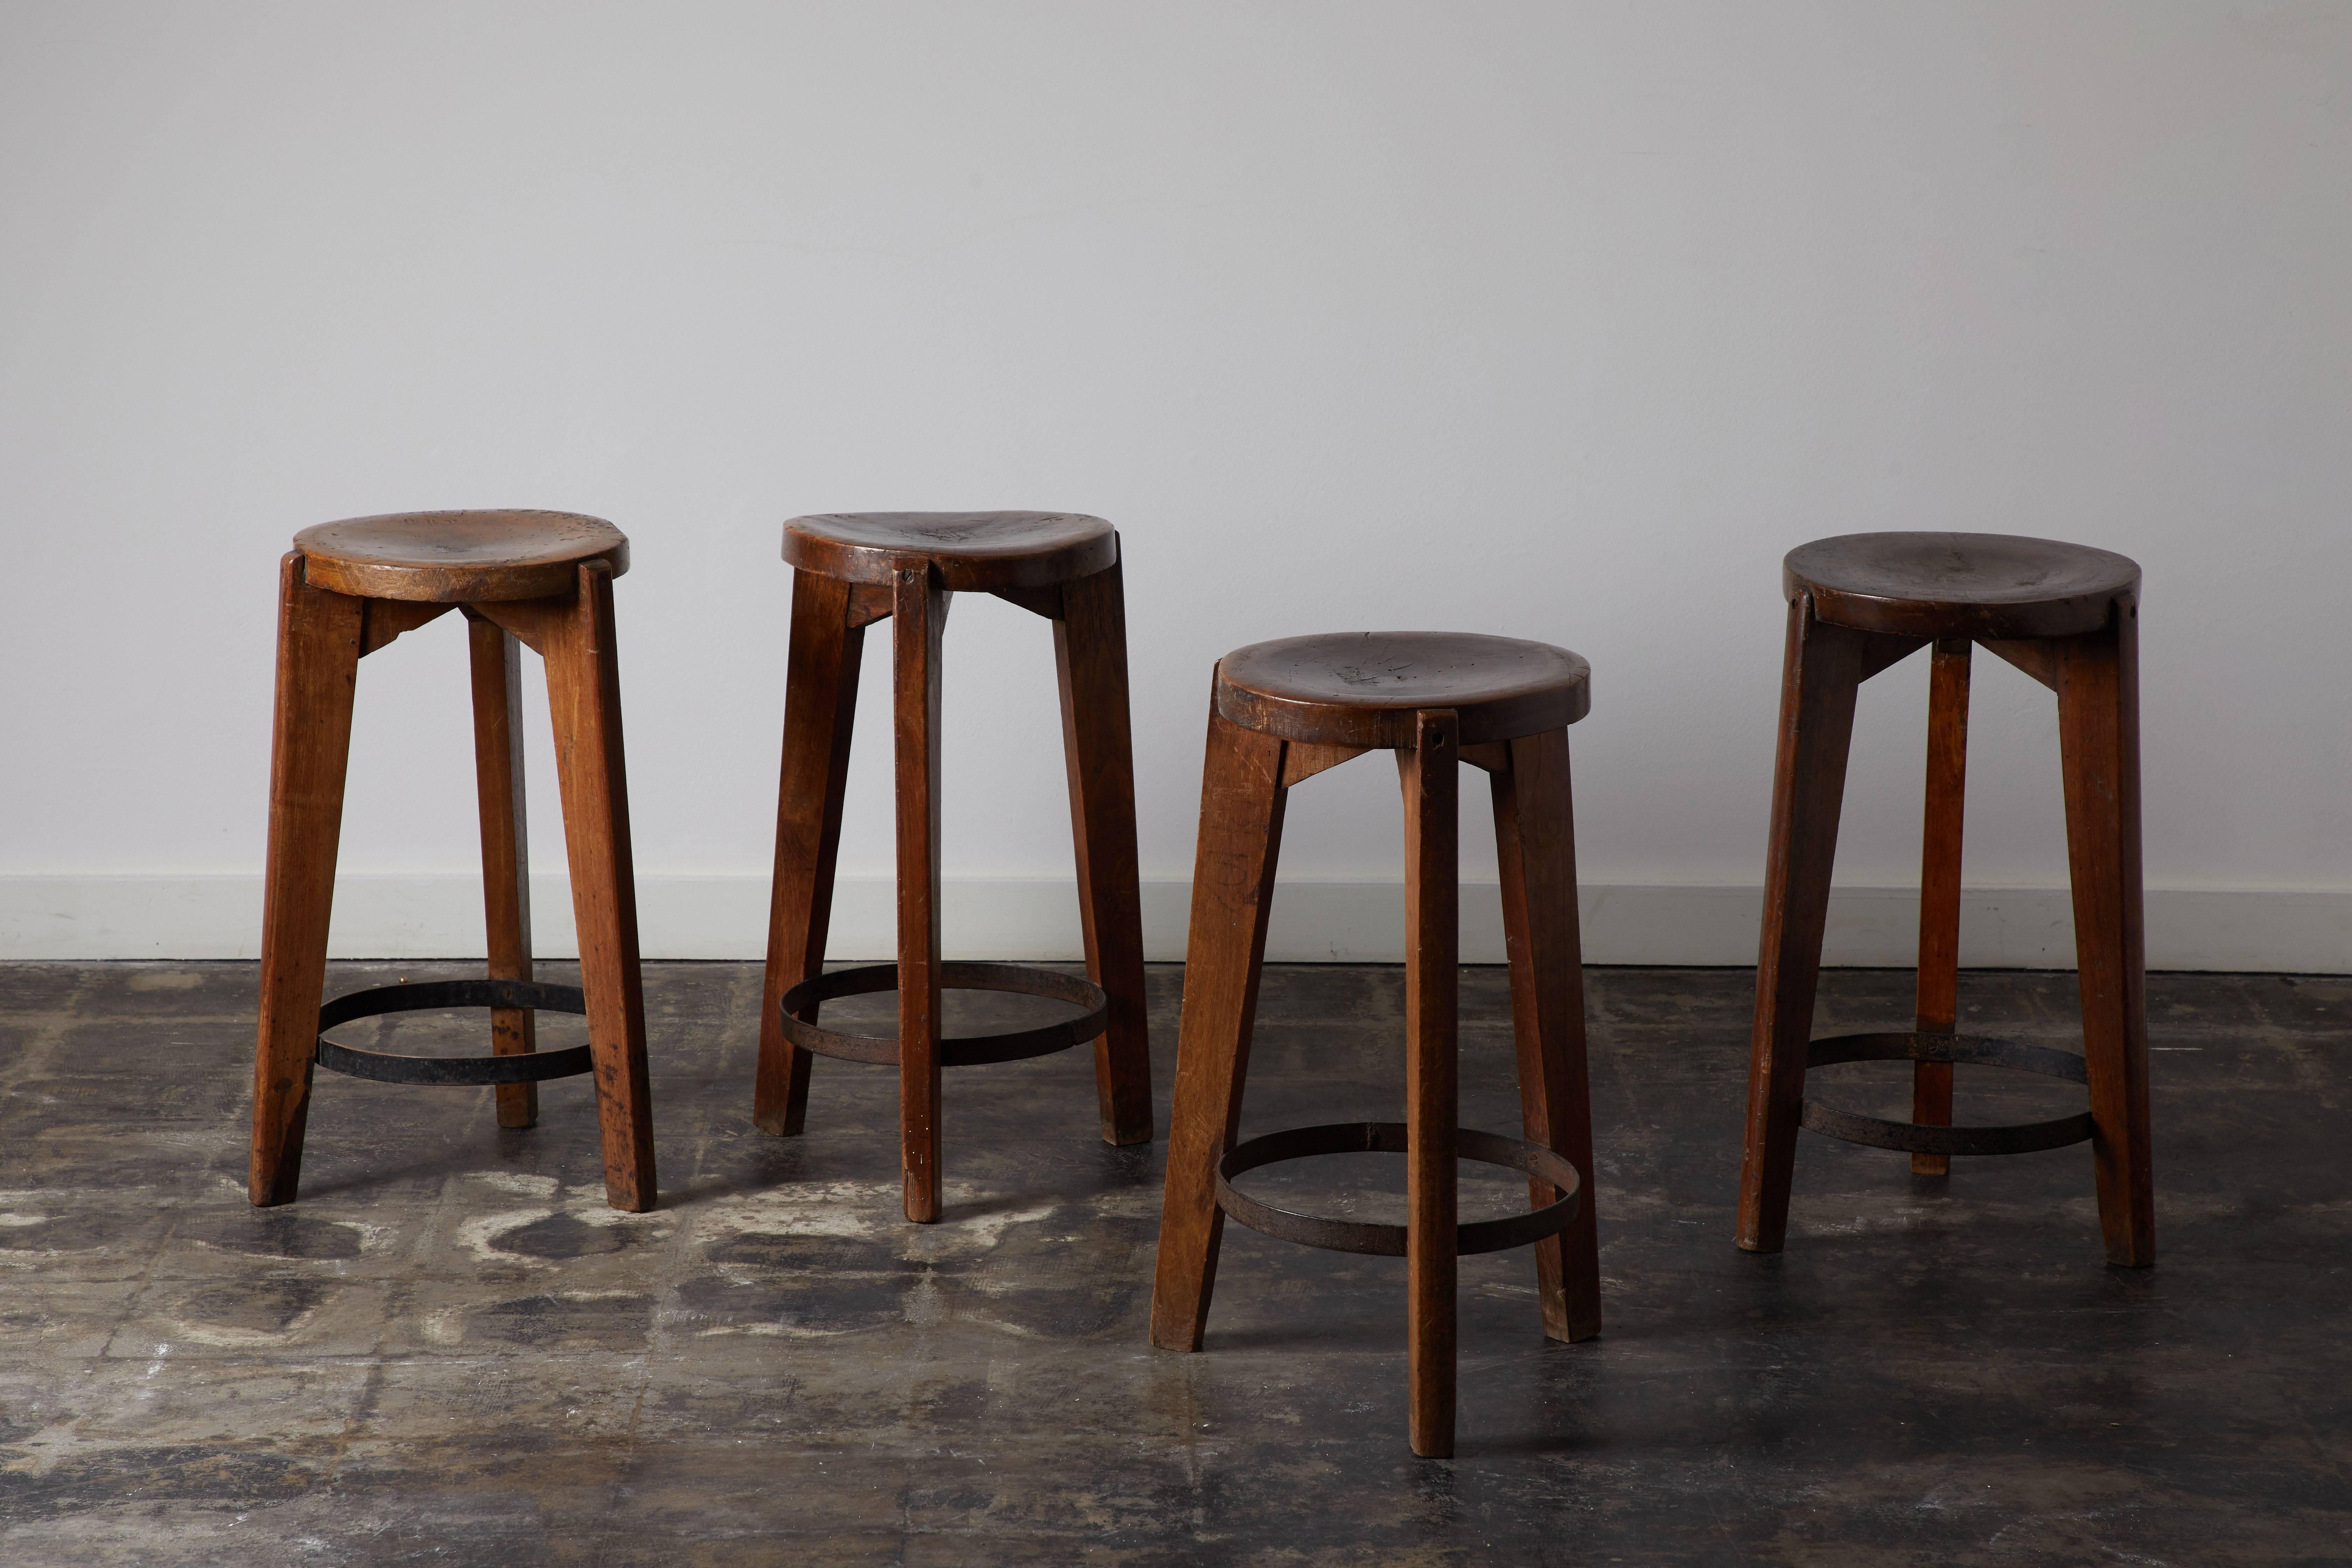 French Set of Four Stools by Pierre Jeanneret for Punjab University in Chandigarh